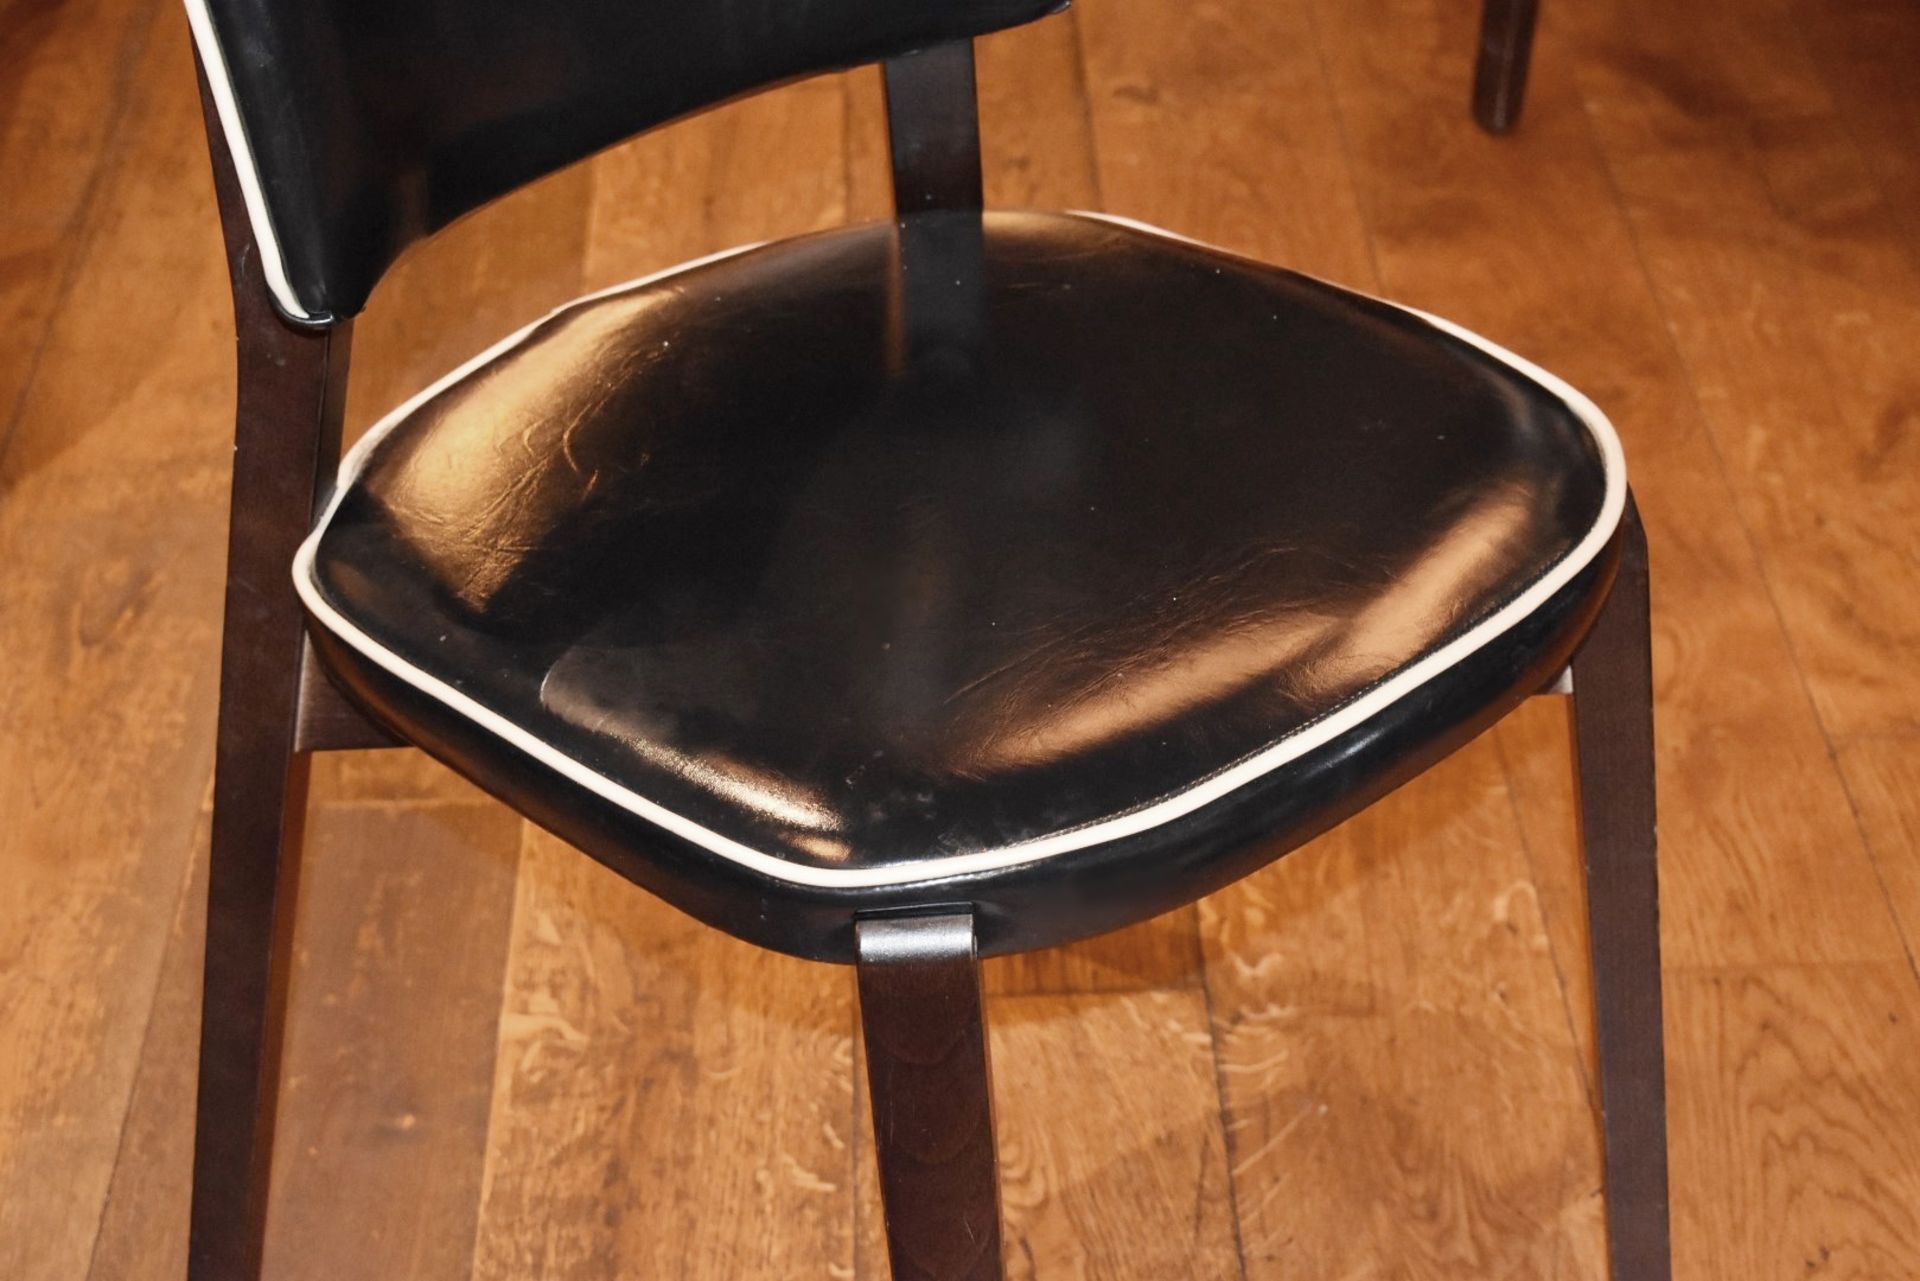 4 x Black Faux Leather Dining Chairs From Italian American Restaurant - Retro Design With Dark - Image 2 of 3